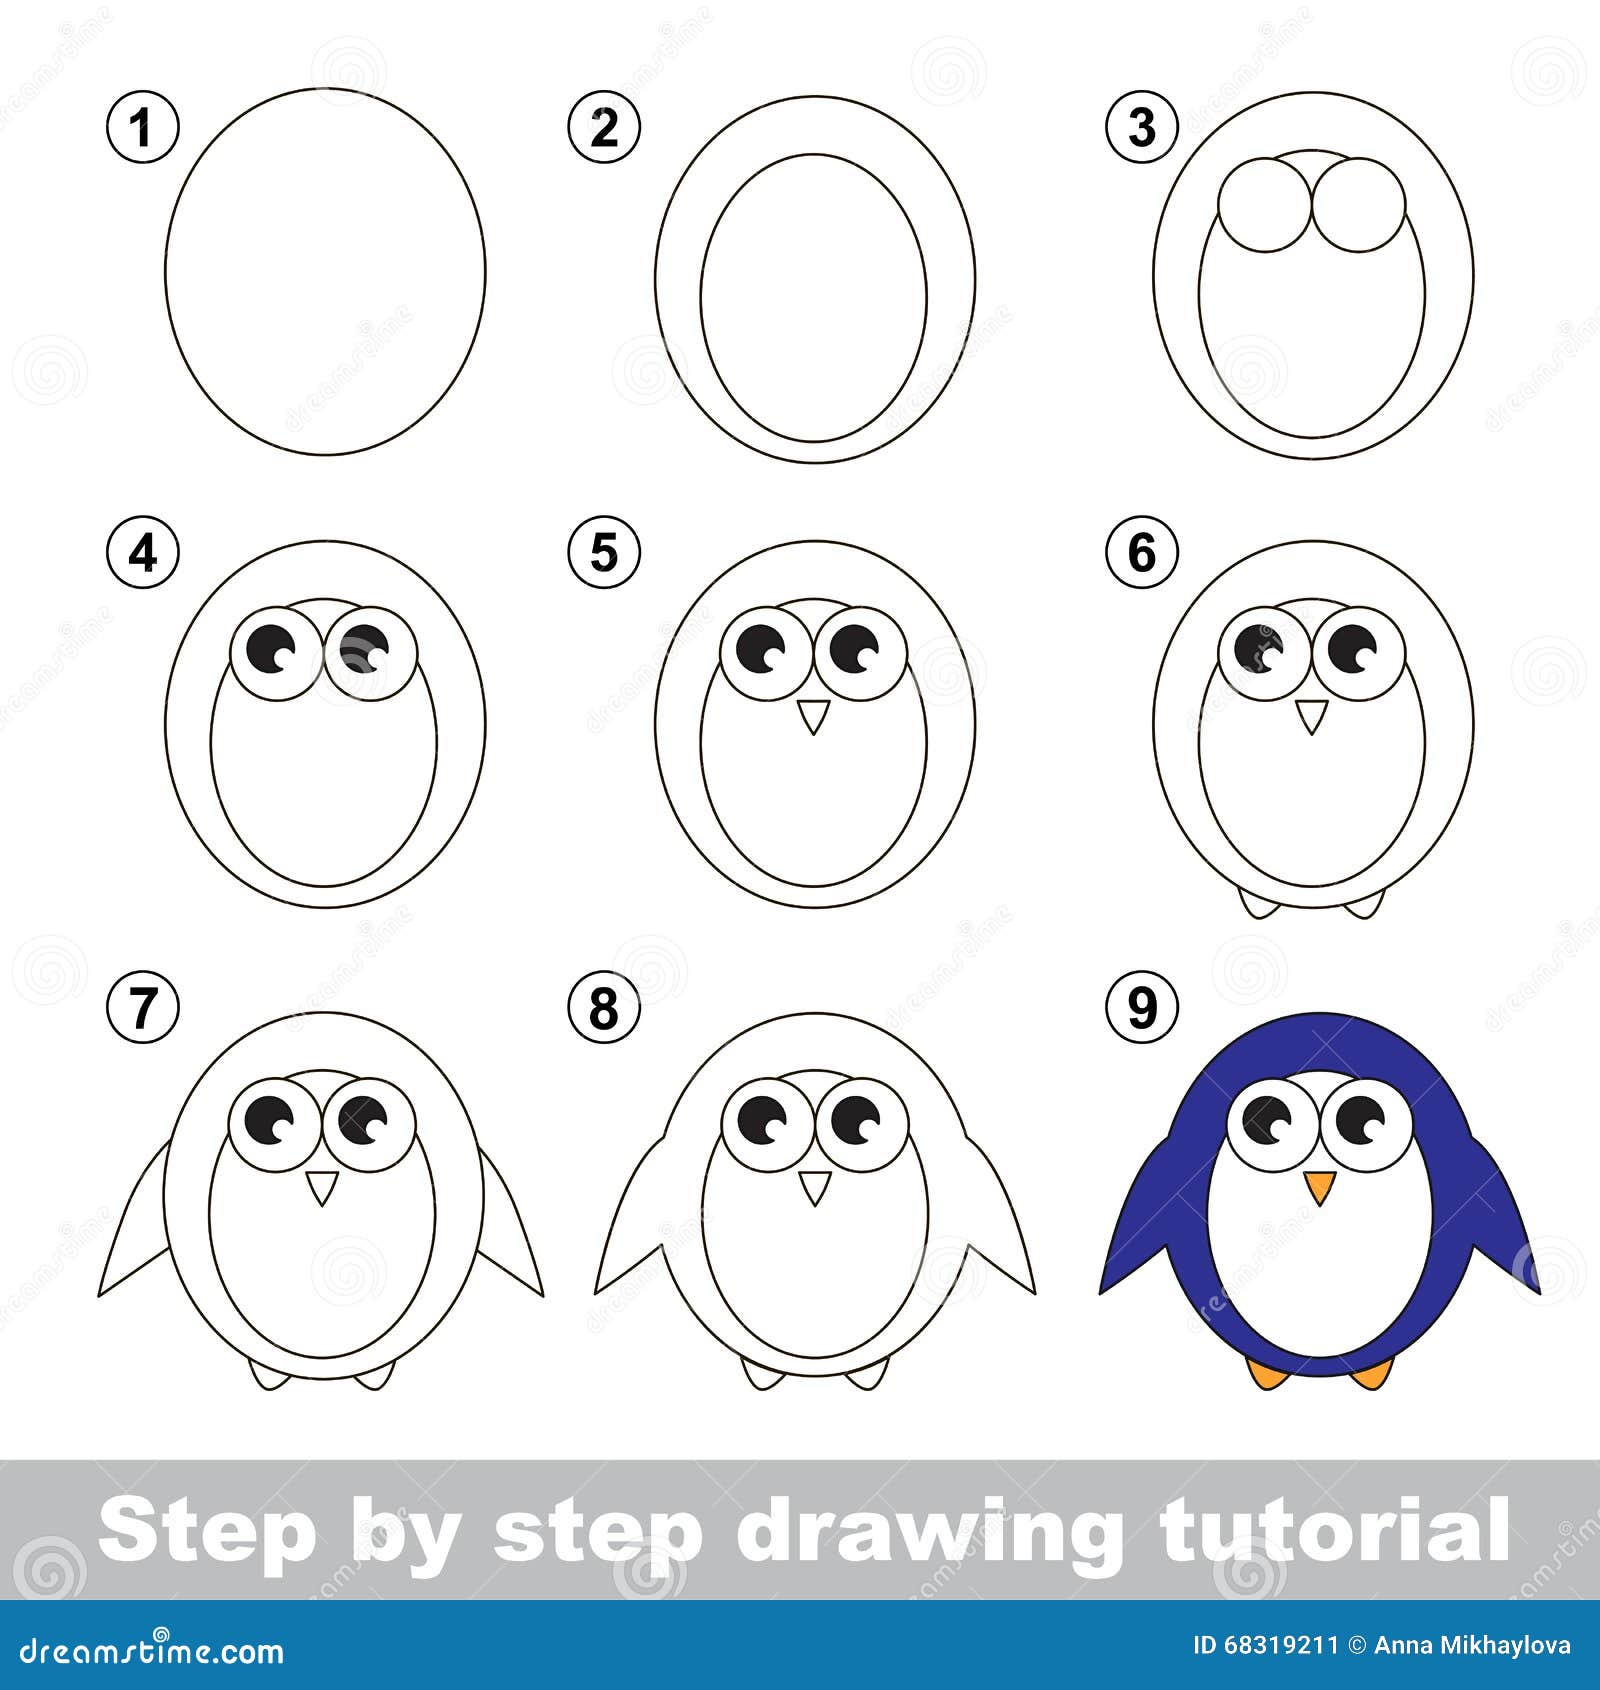 drawing tutorial. how to draw a penguin